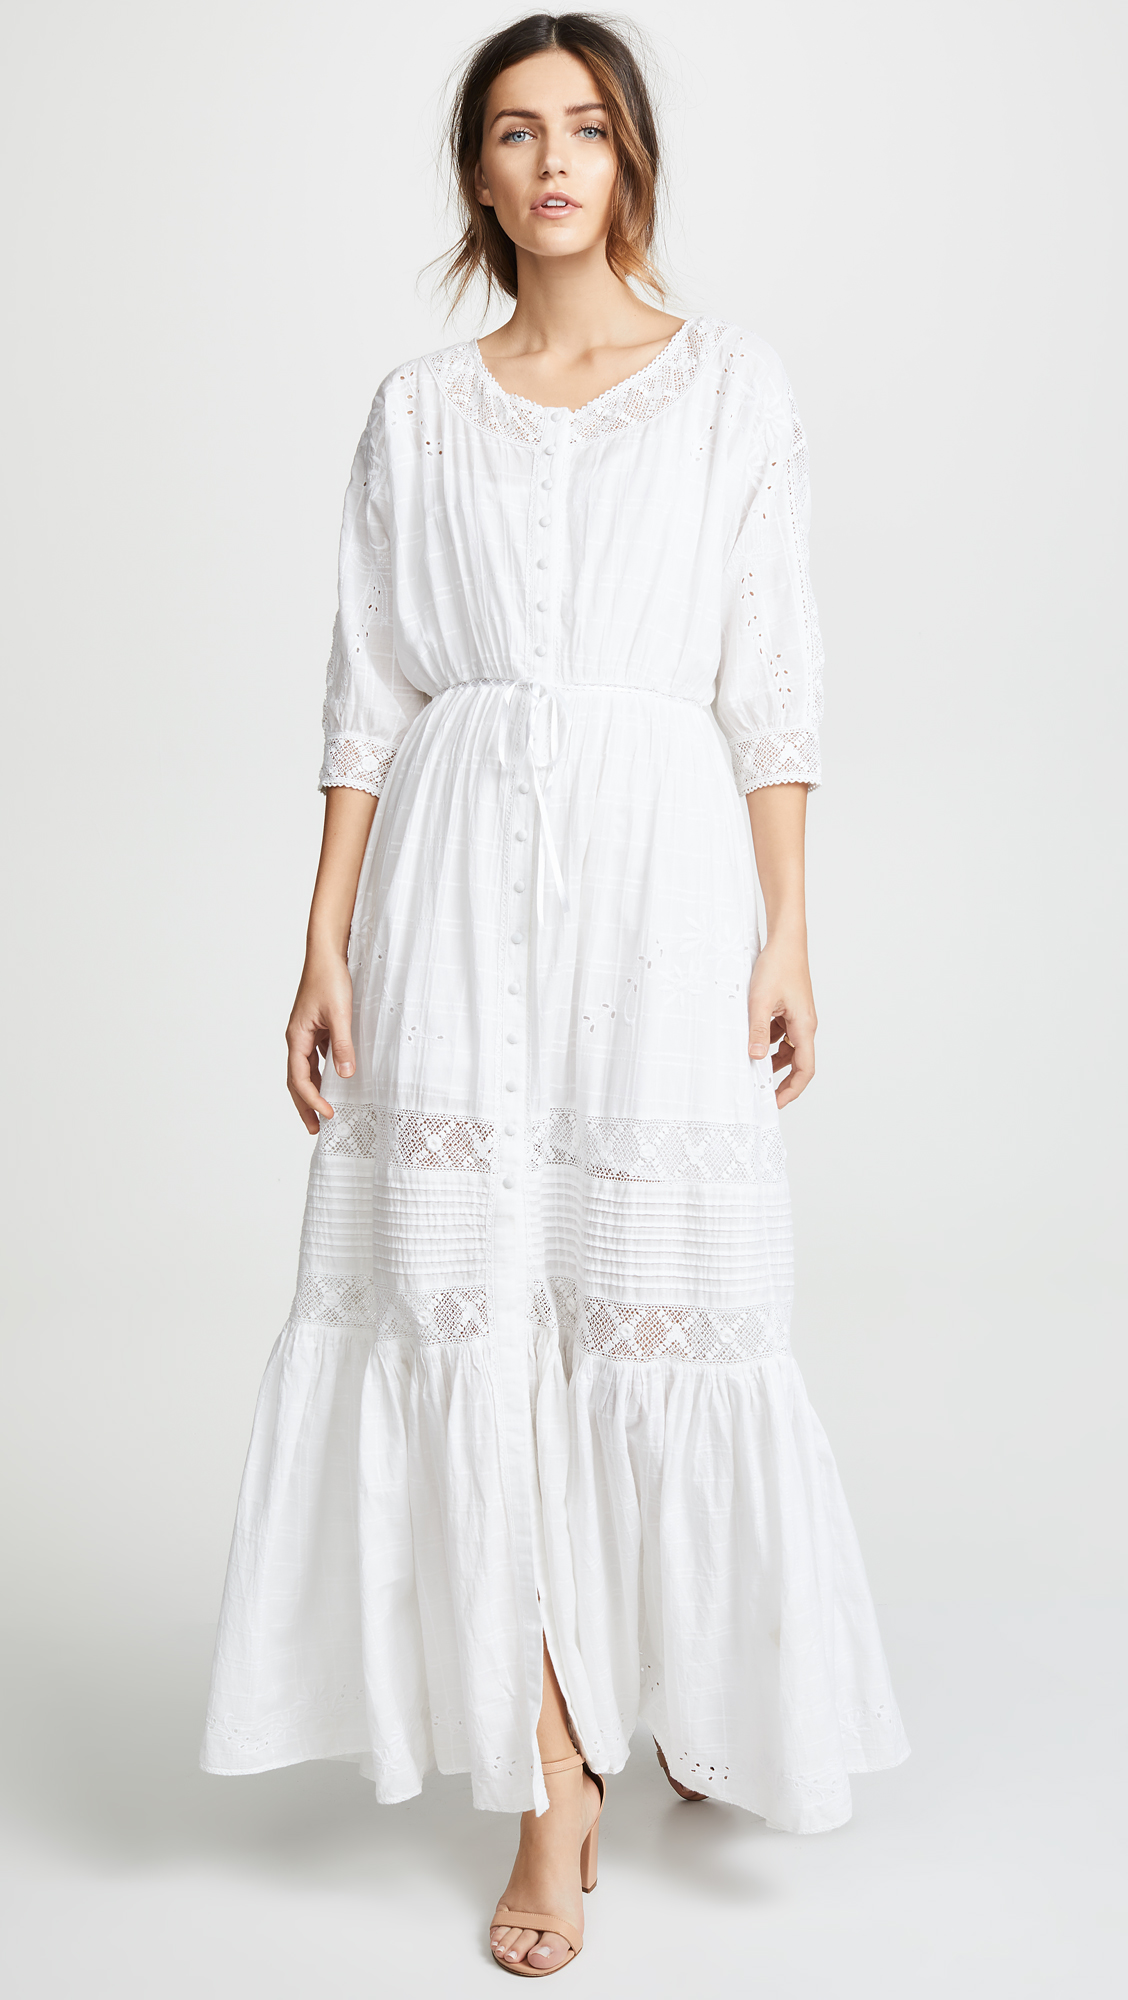 Eyelet Embroidered Lace Dress